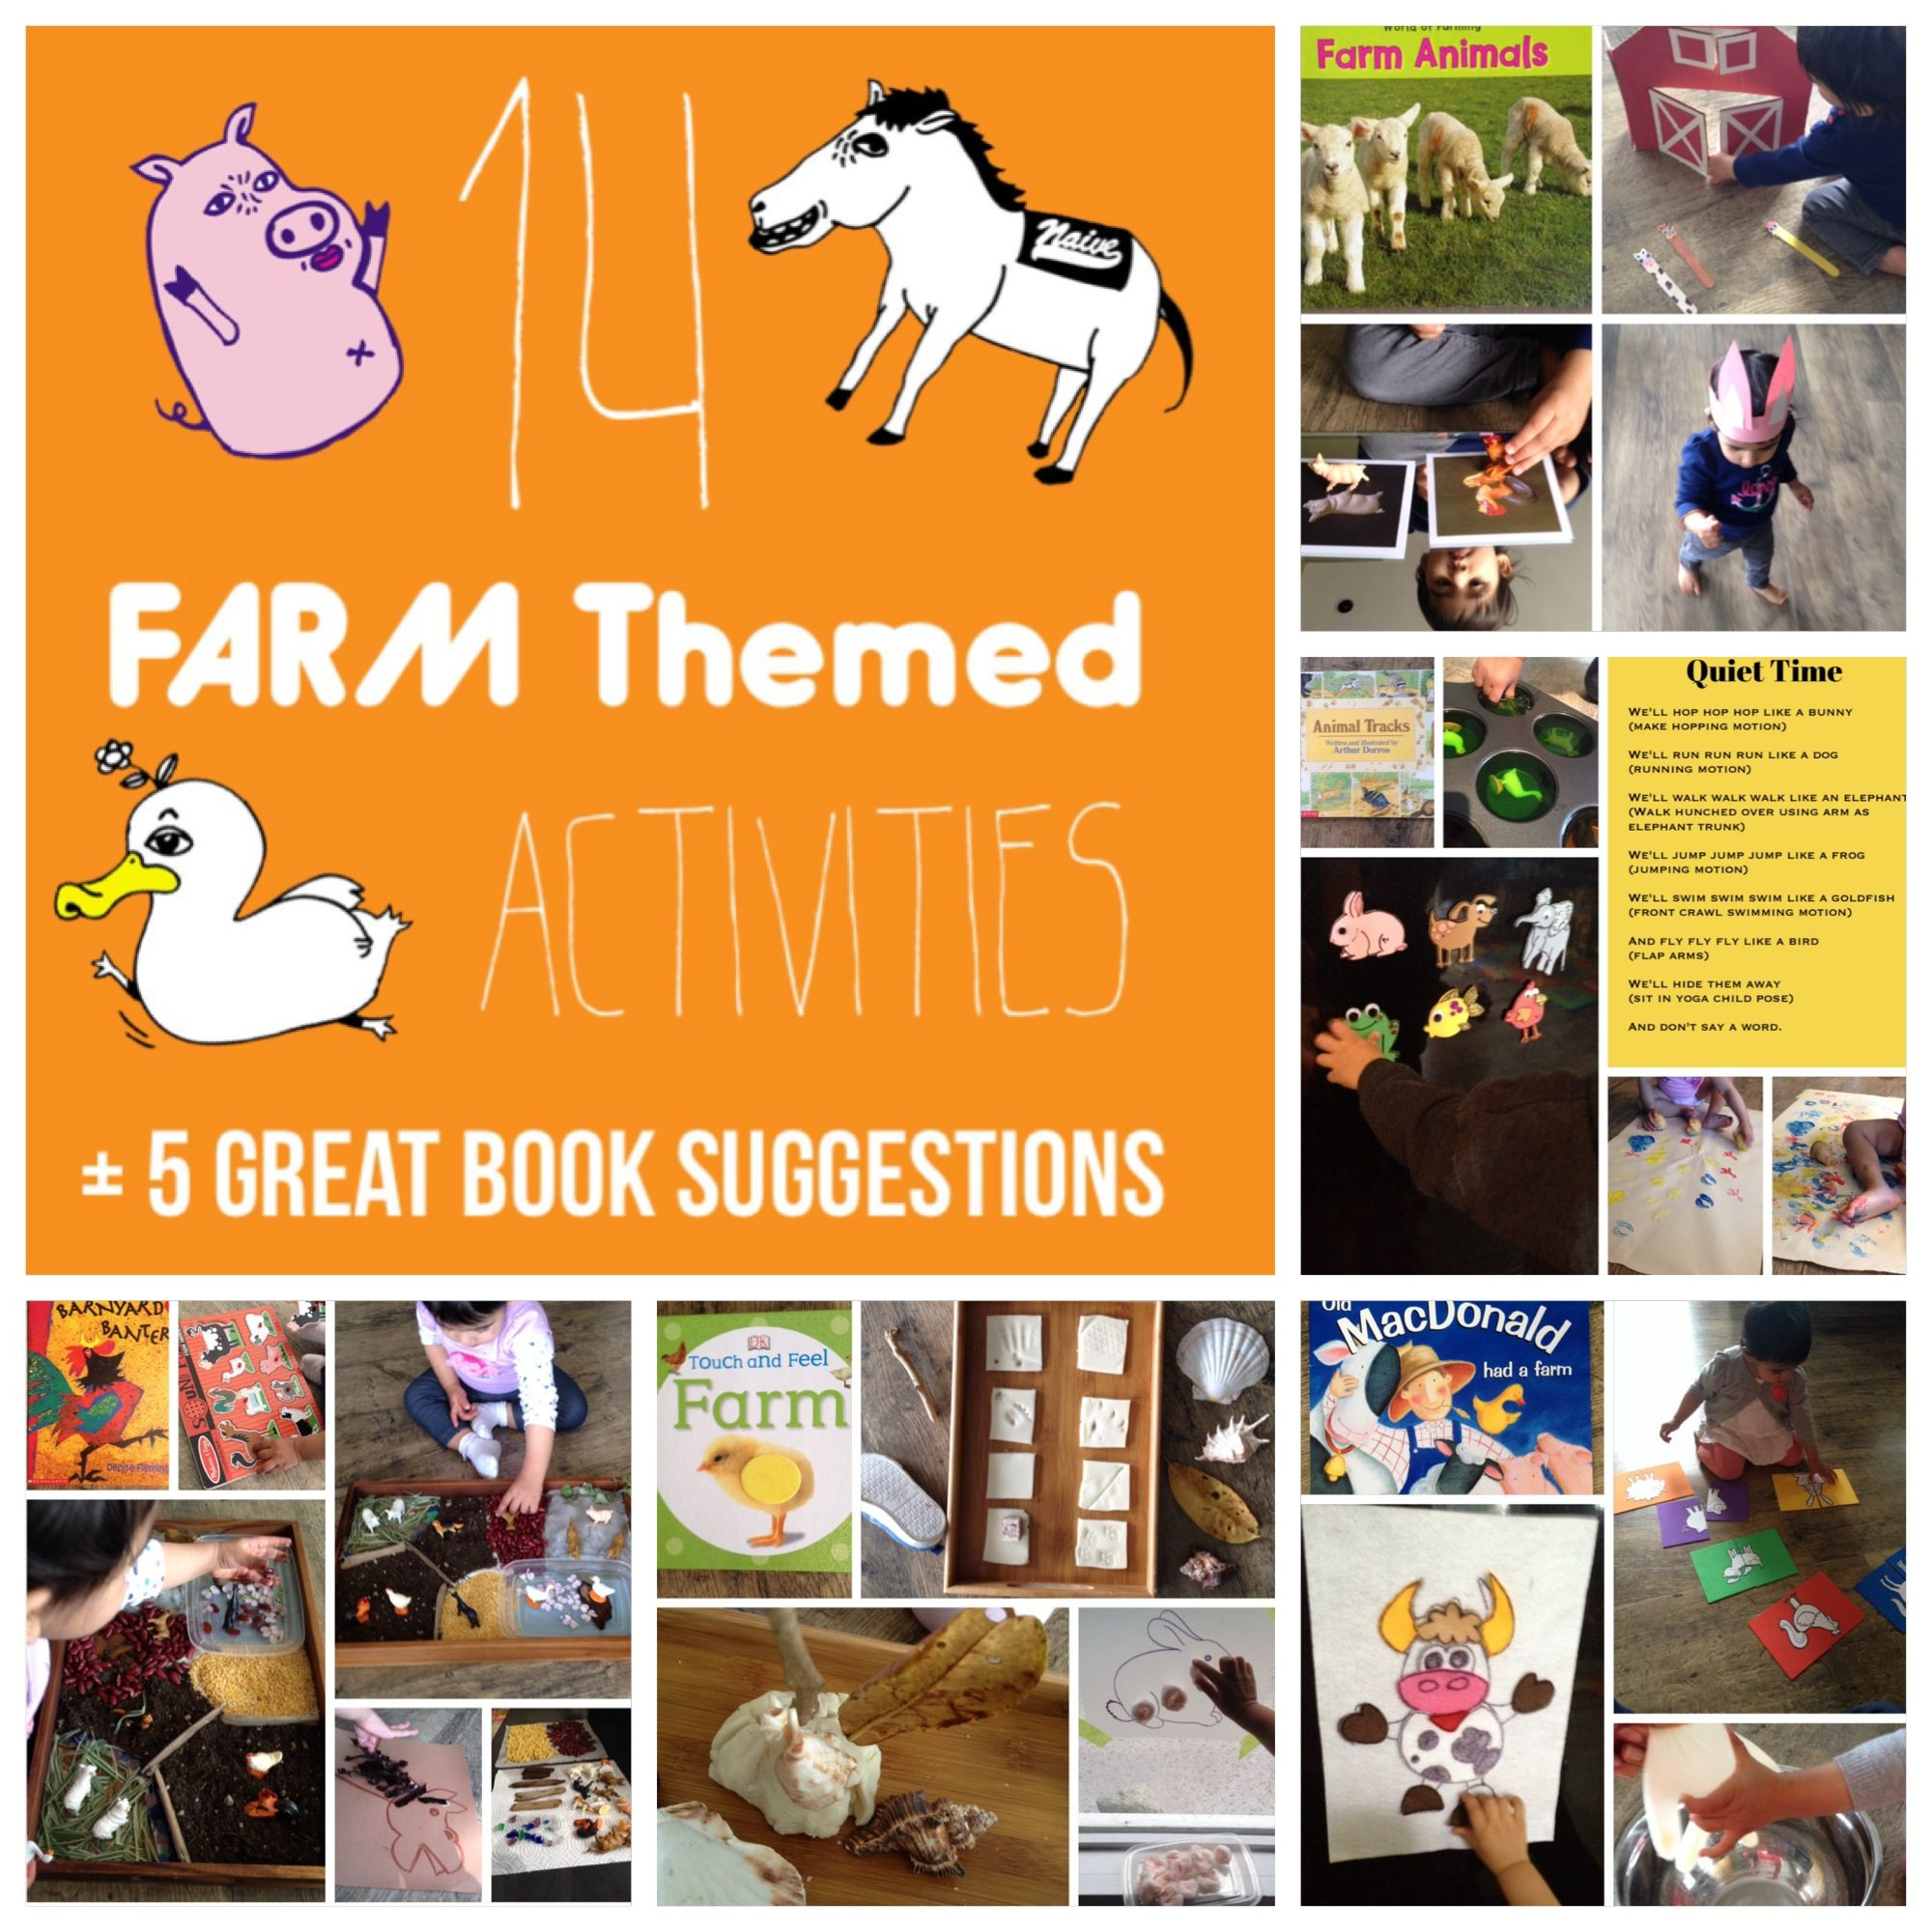 Farm Animals toddlers Activity